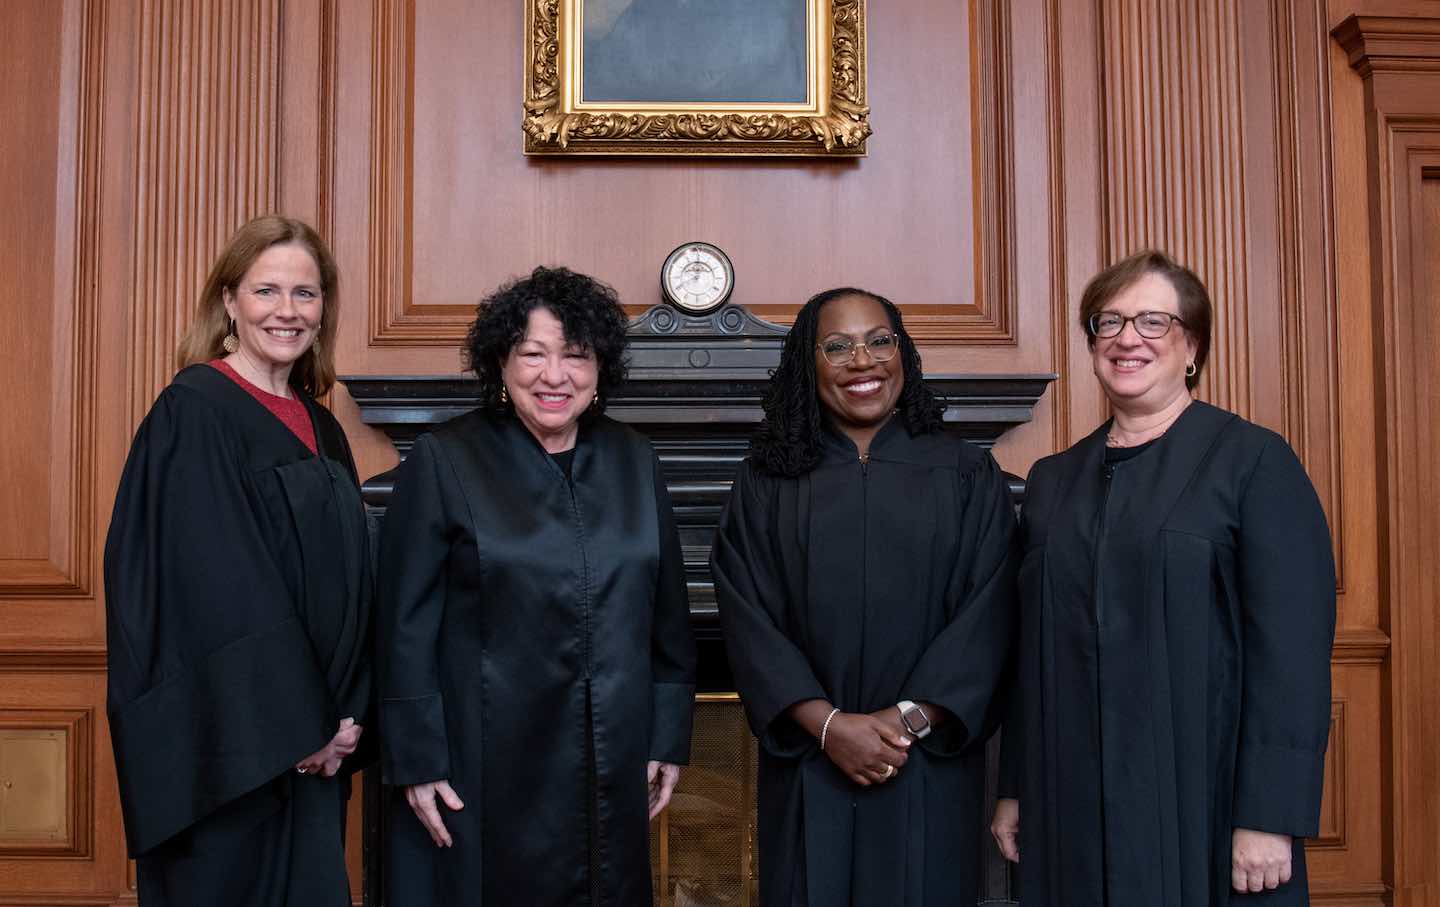 Having More Women on the Federal Courts Is Long Overdue